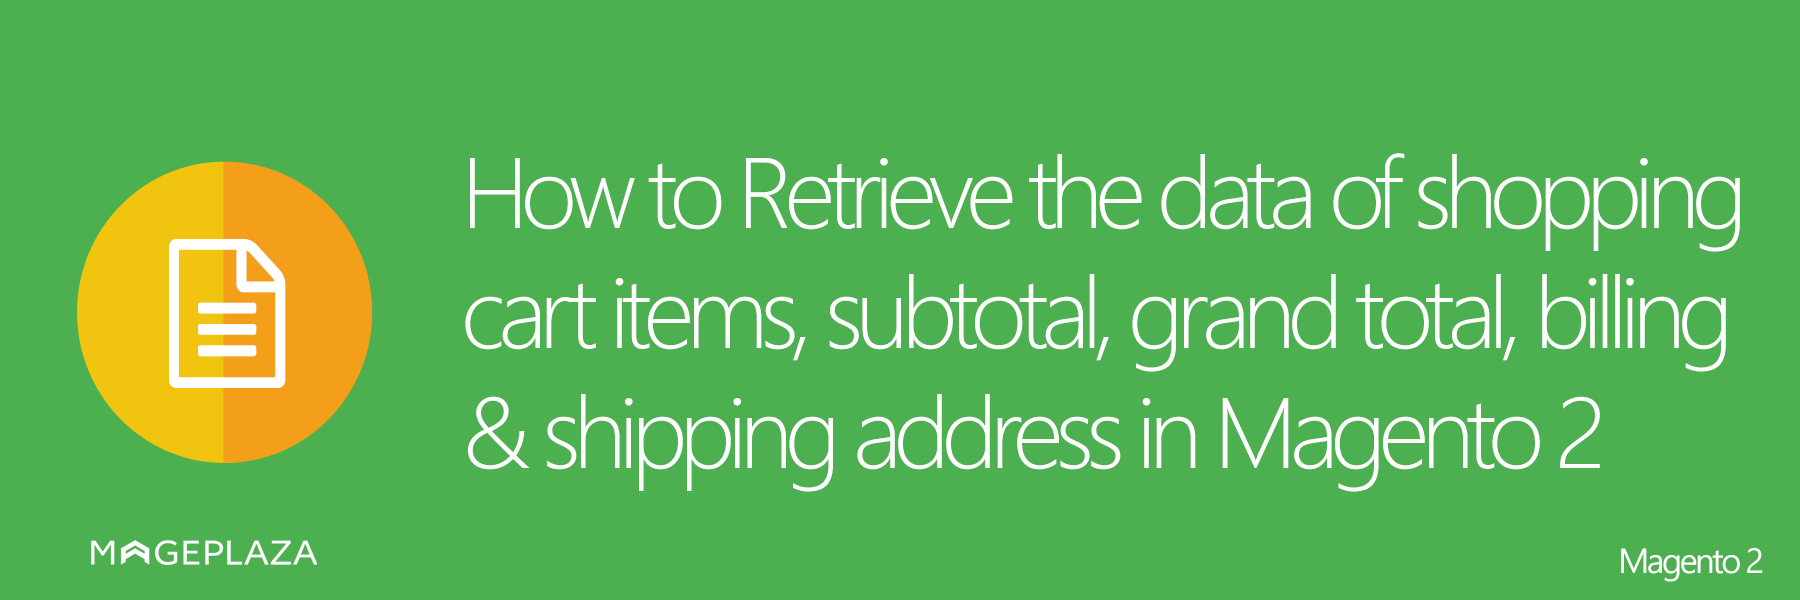 Get the data of shopping cart items, subtotal, grand total, billing & shipping address